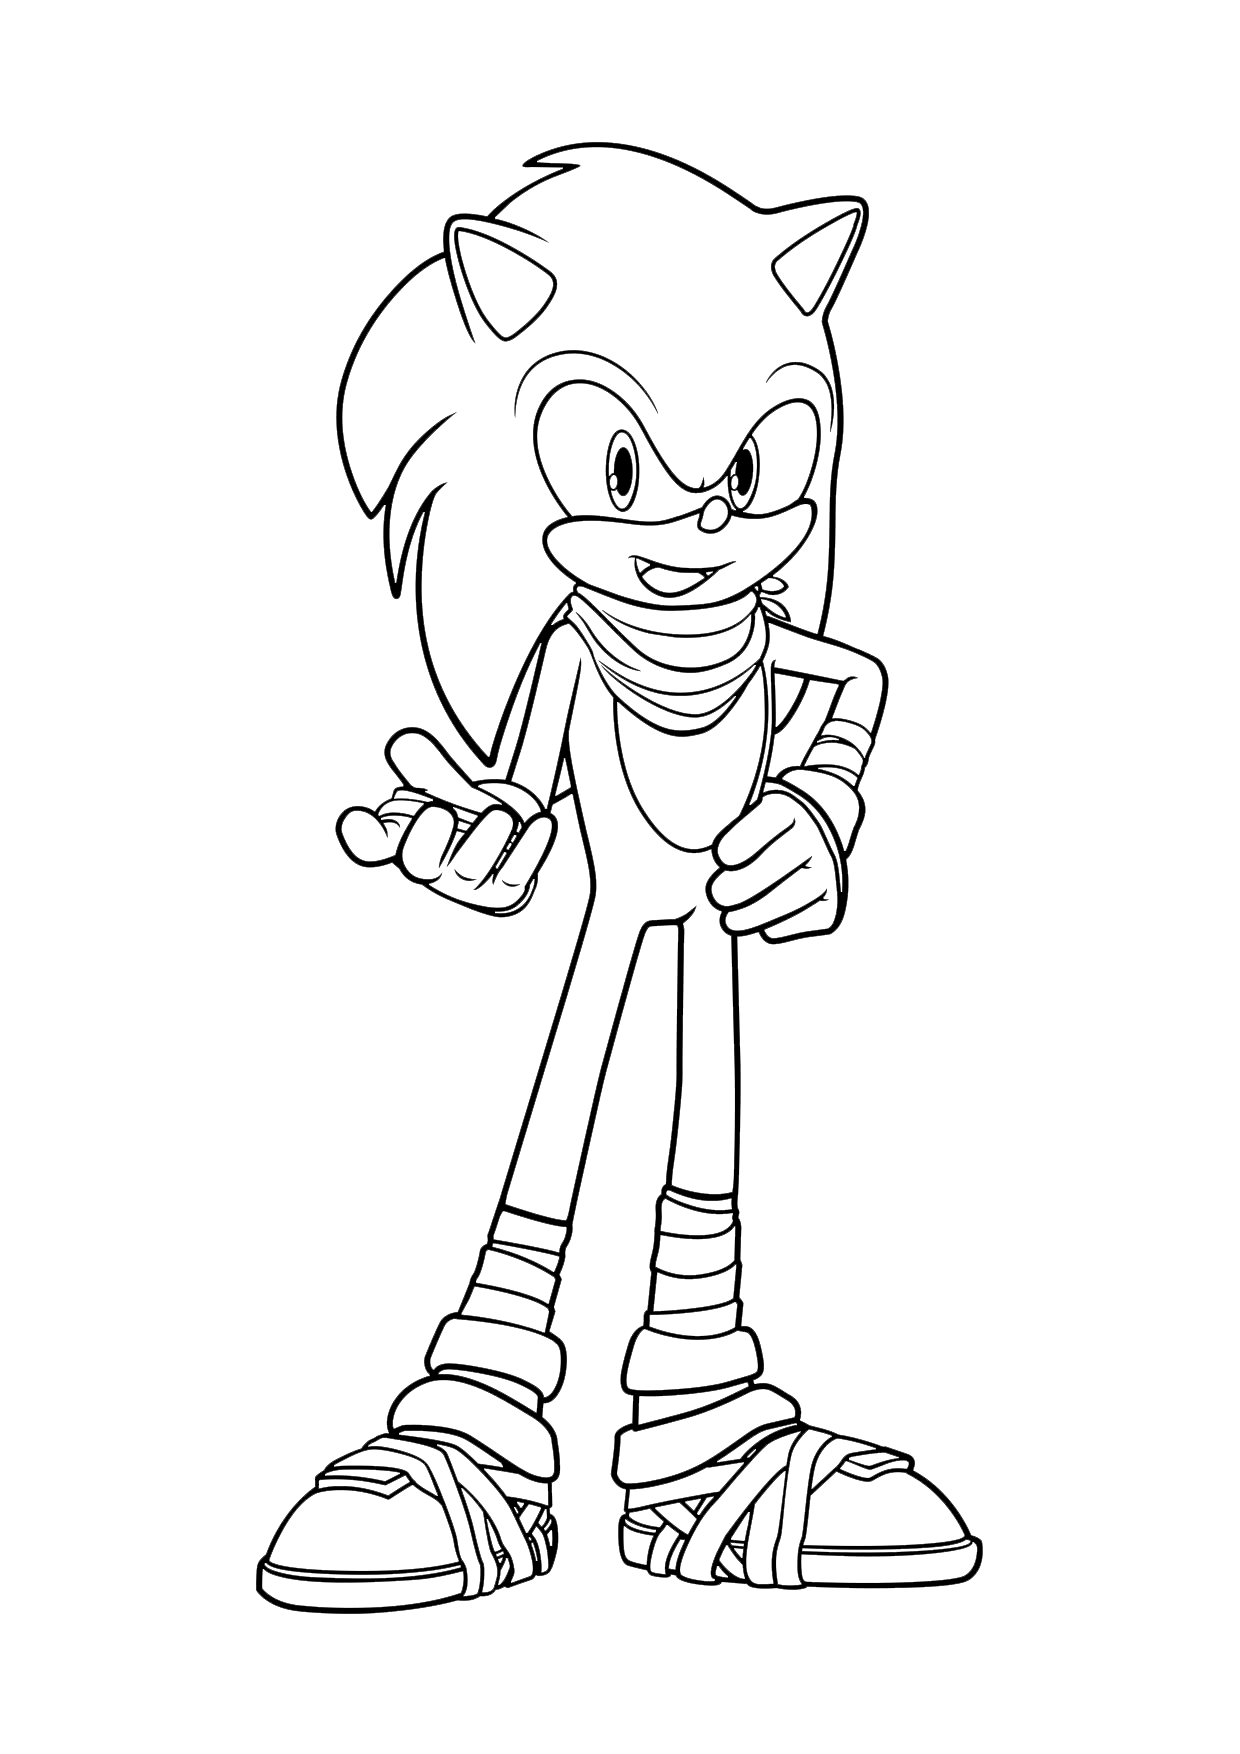 Download Sonic Ready To Fight Coloring Page - Free Printable ...